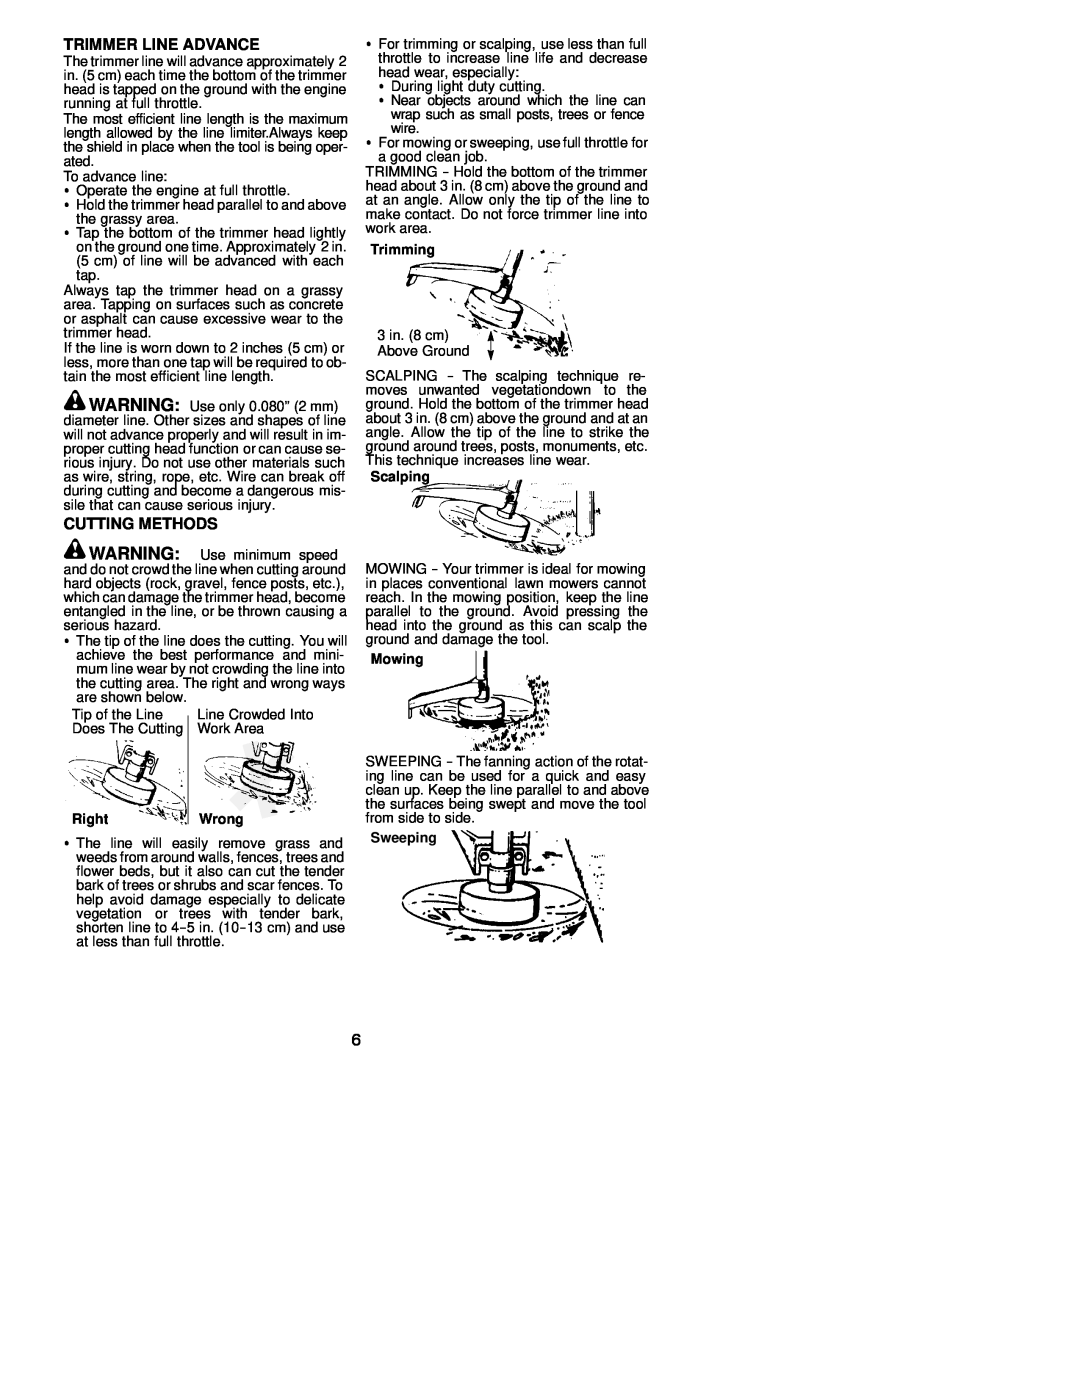 Weed Eater 530163505 instruction manual Trimmer Line Advance, Cutting Methods, Right, Trimming, Scalping, Mowing, Sweeping 